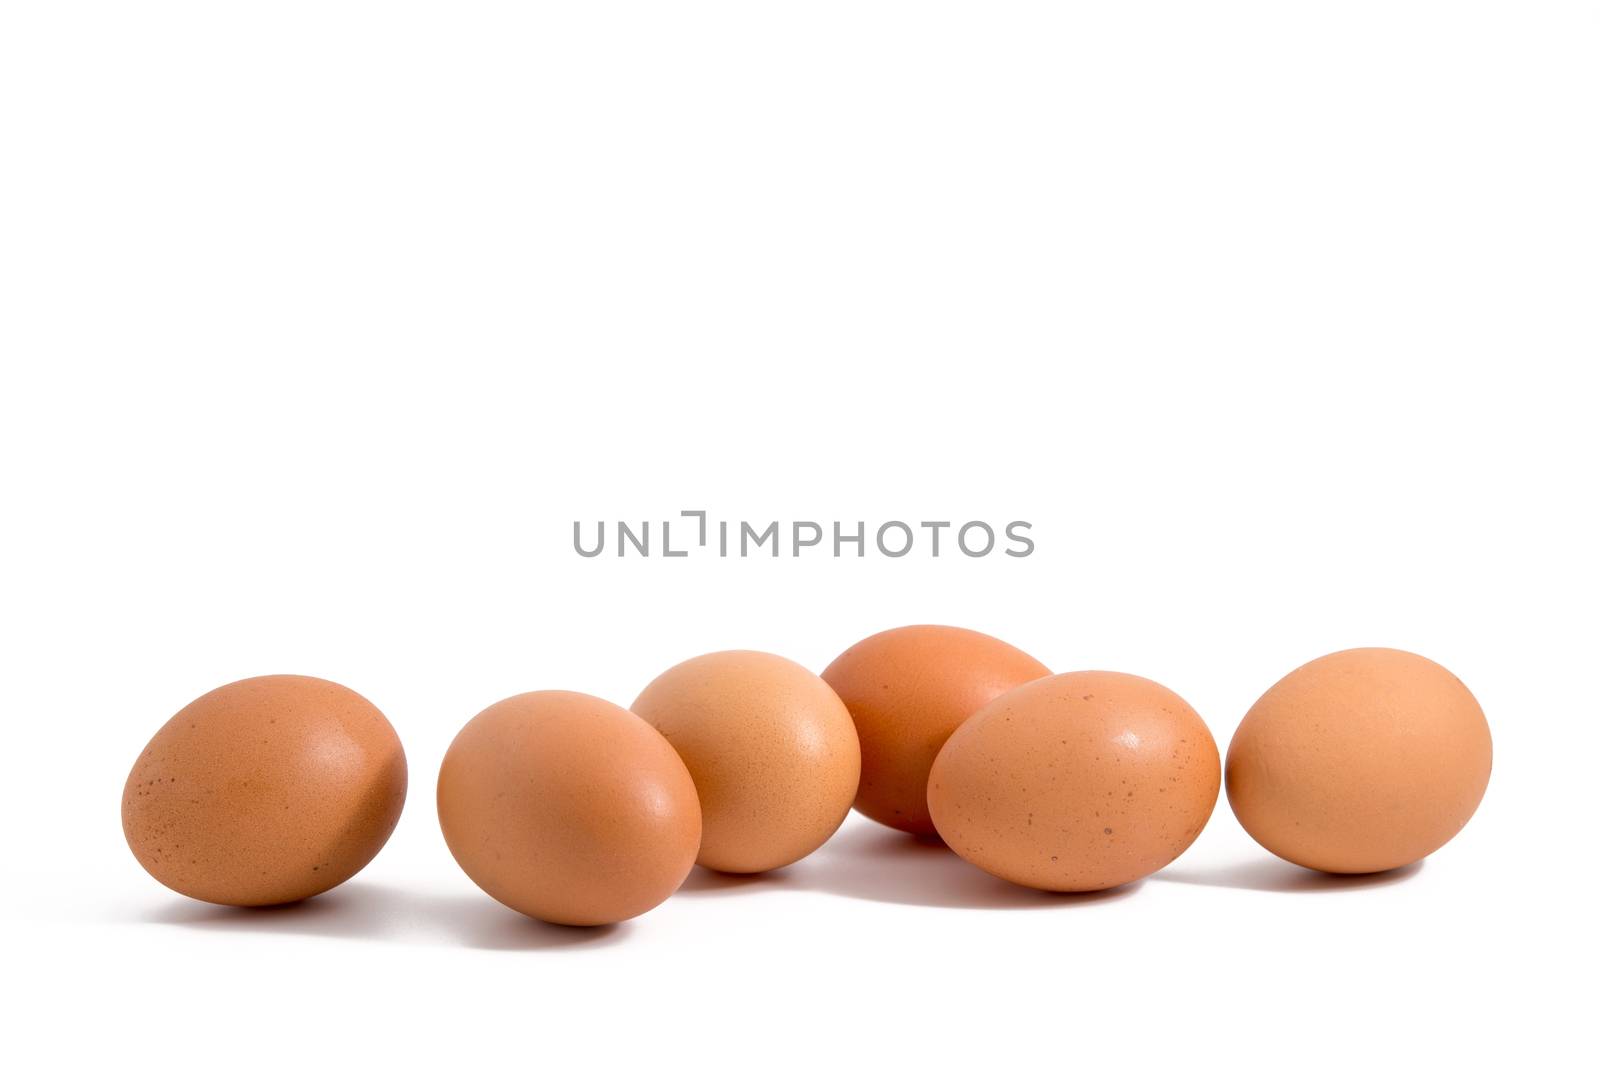 six eggs in a row on white background by antpkr